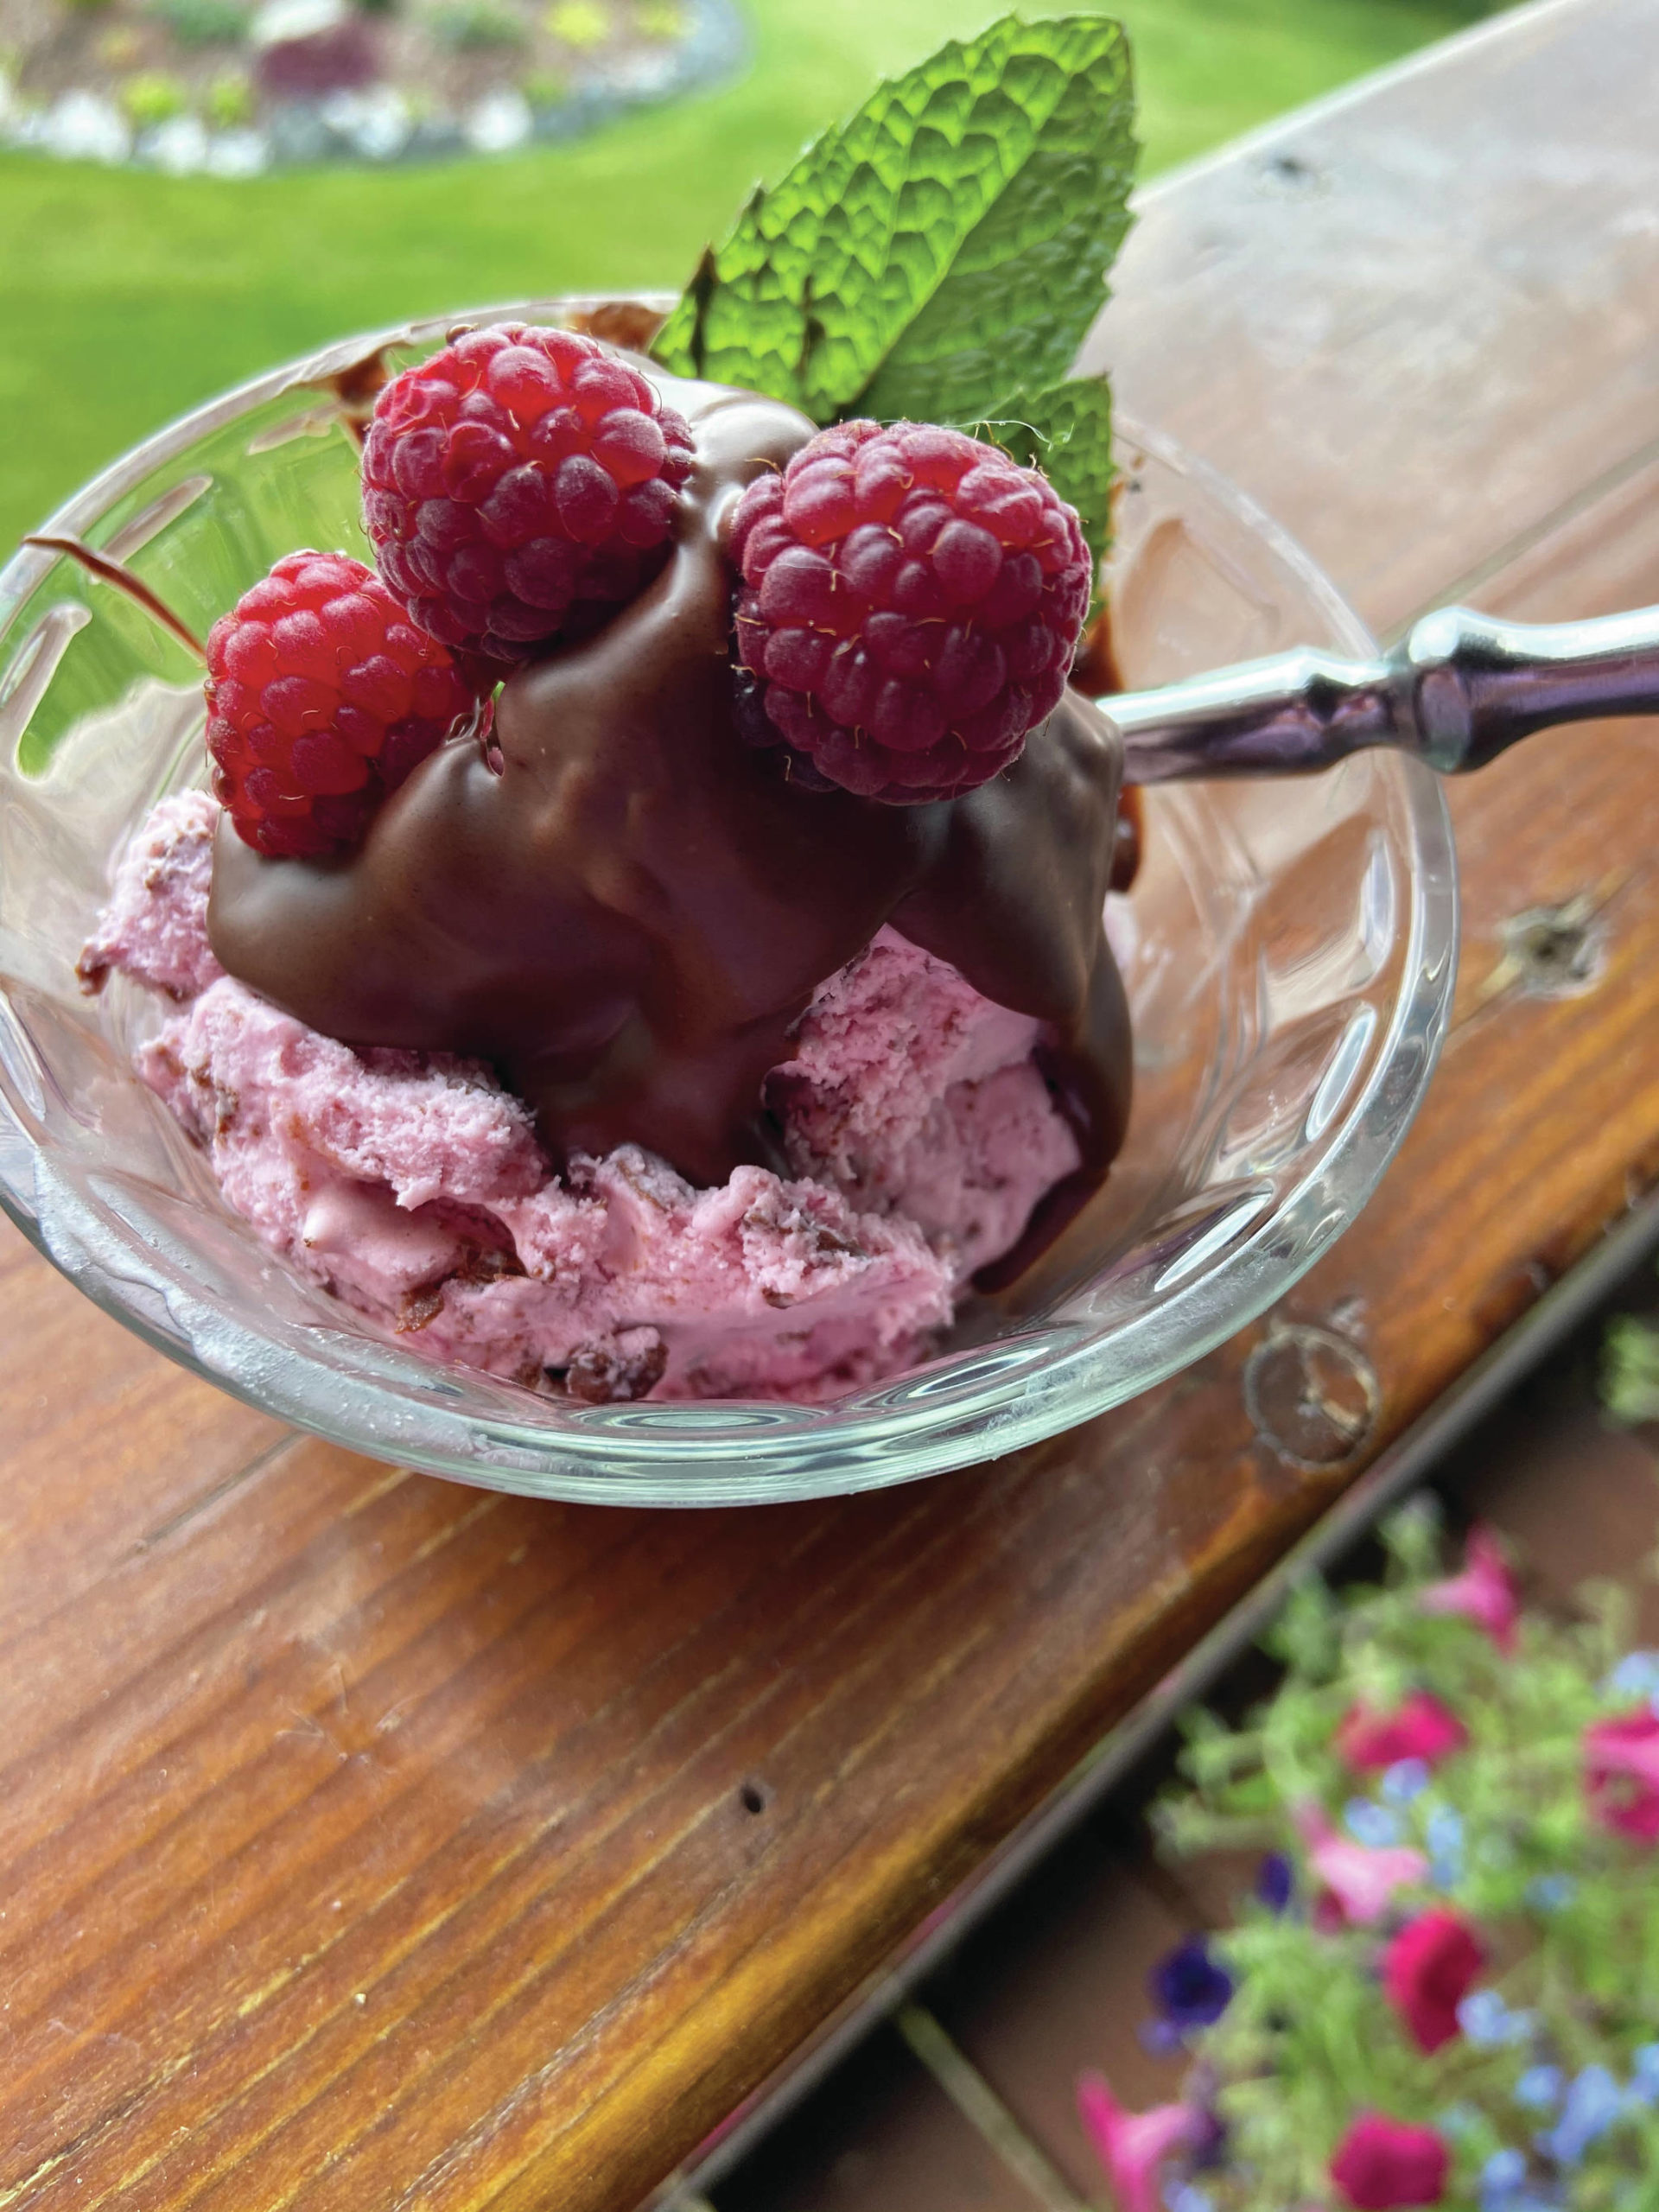 Chocolate-flake raspberry ice cream is the perfect end-of-summer dessert to make with raspberries, as seen here in Teri Robl’s Homer, Alaska, kitchen on Sept. 8, 2020. (Photo by Teri Robl)